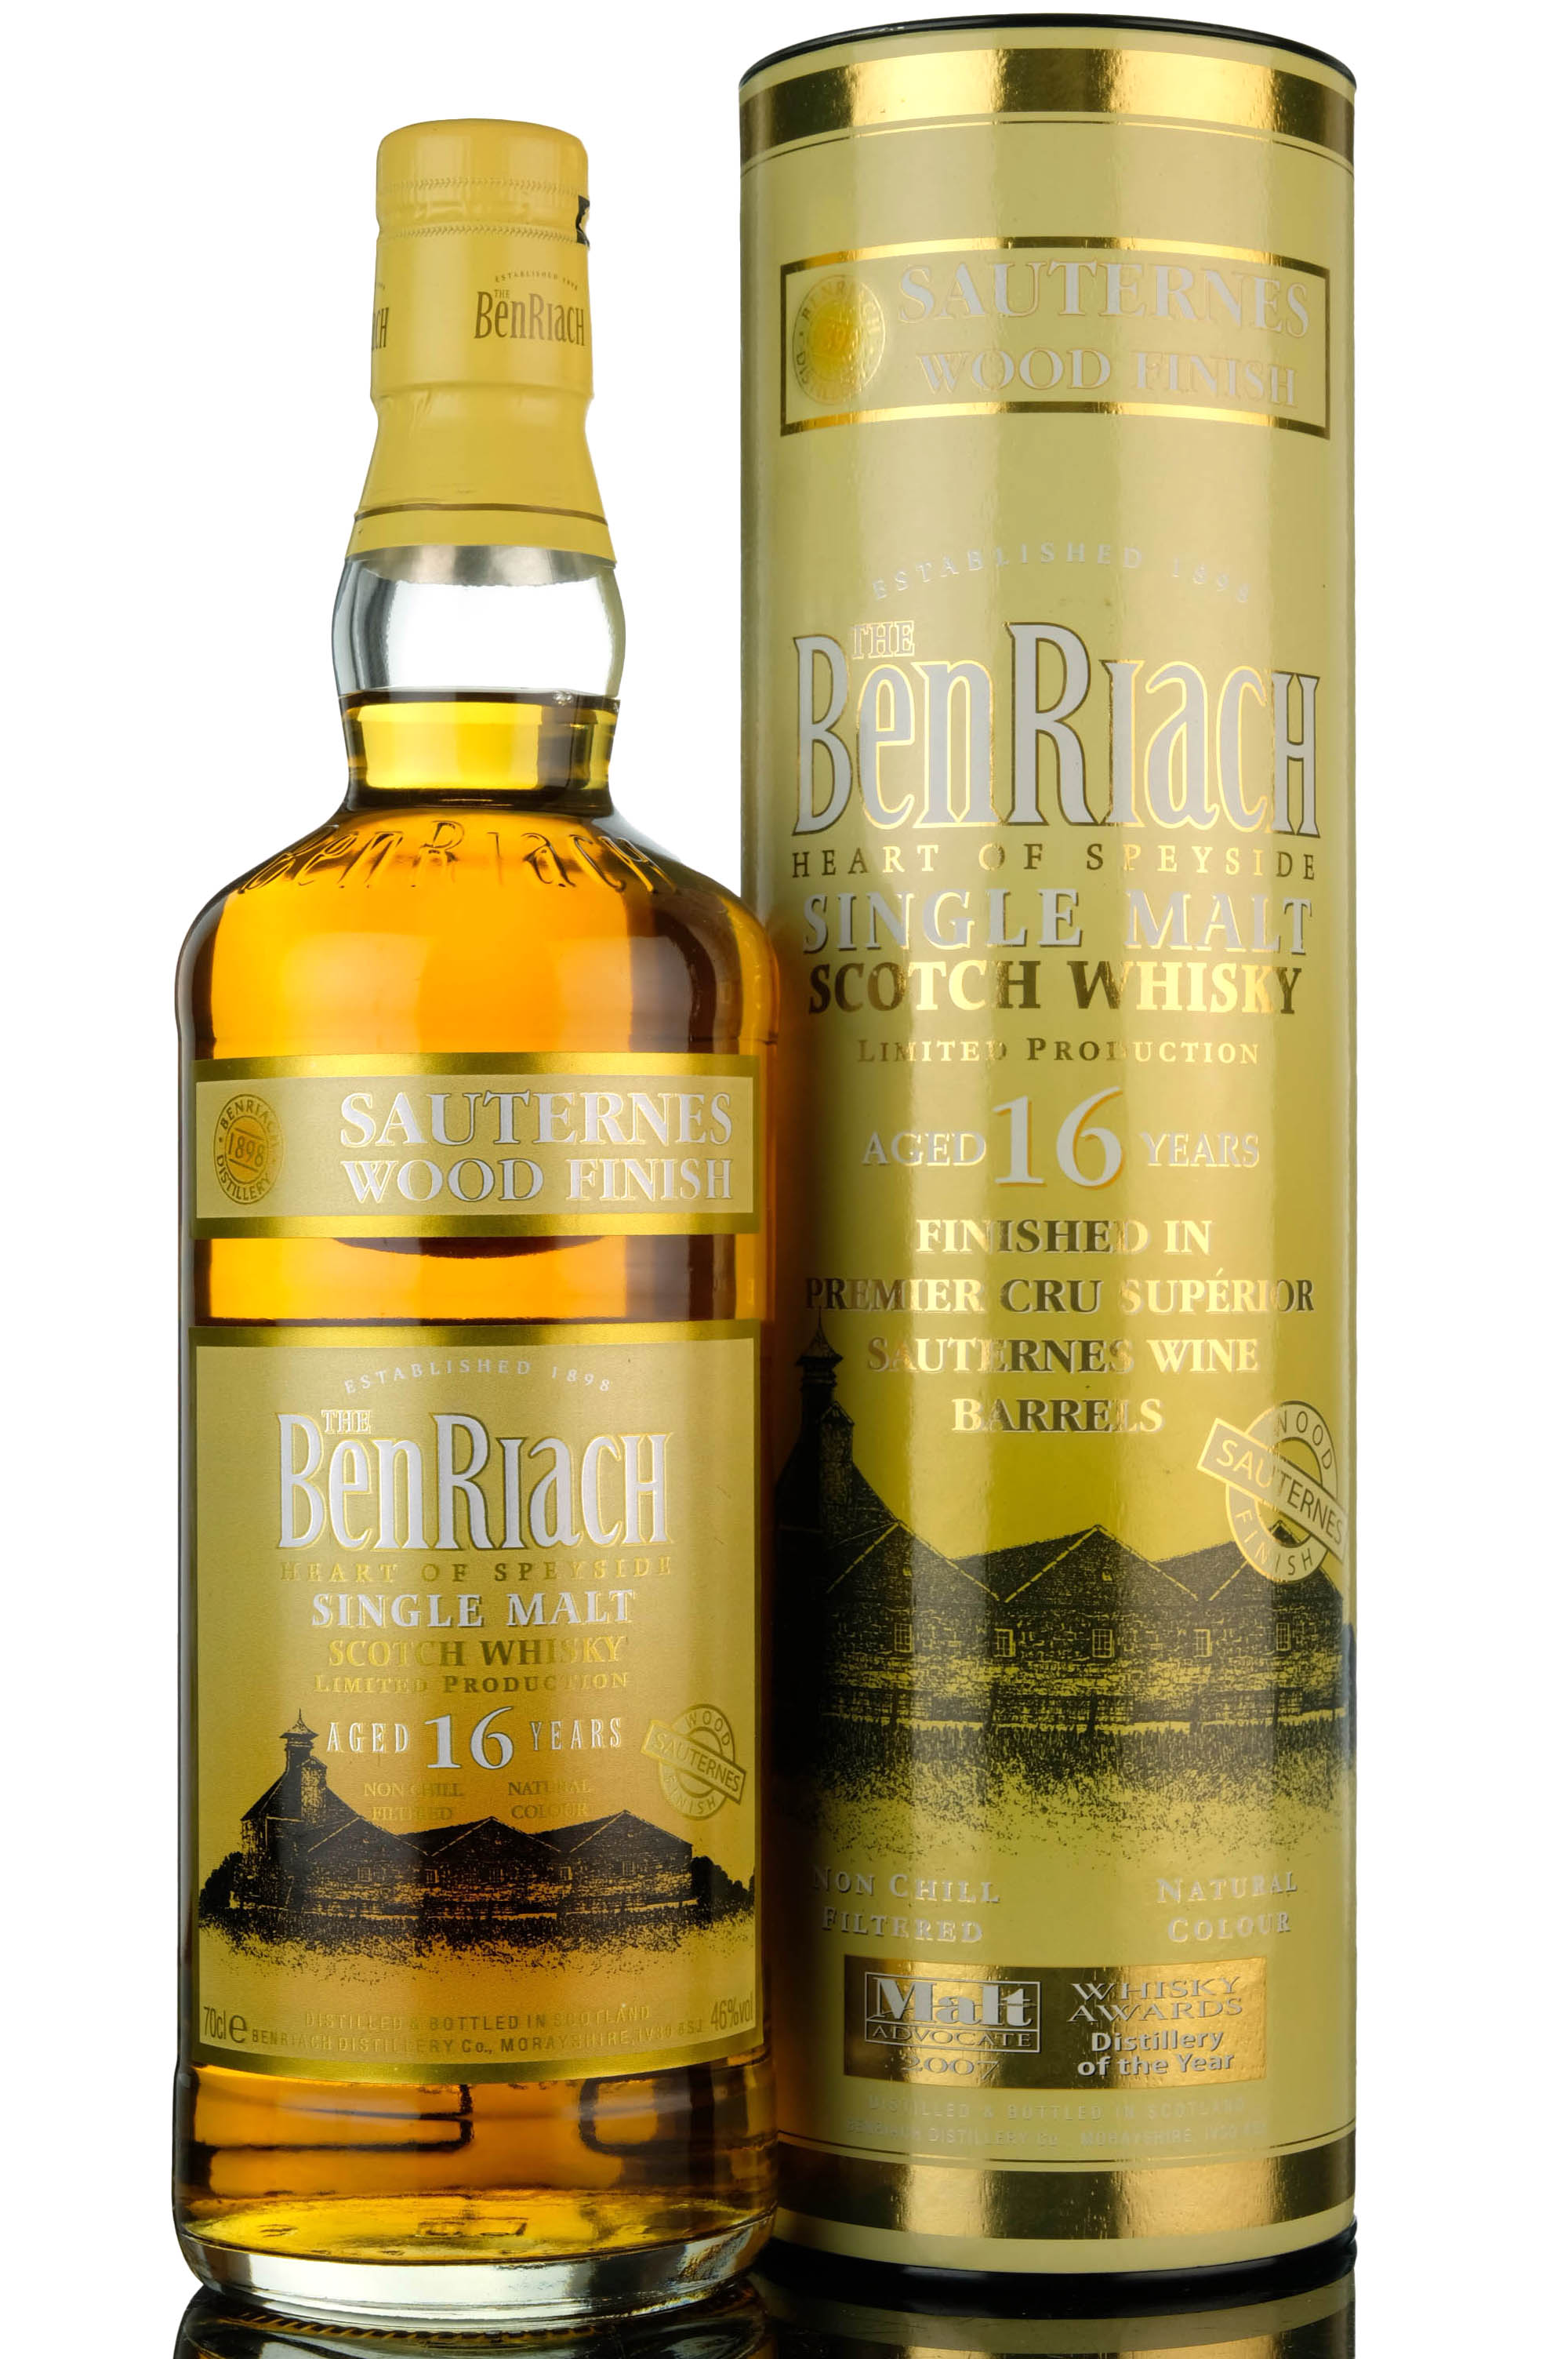 Benriach 16 Year Old - Sauternes Wood Finish